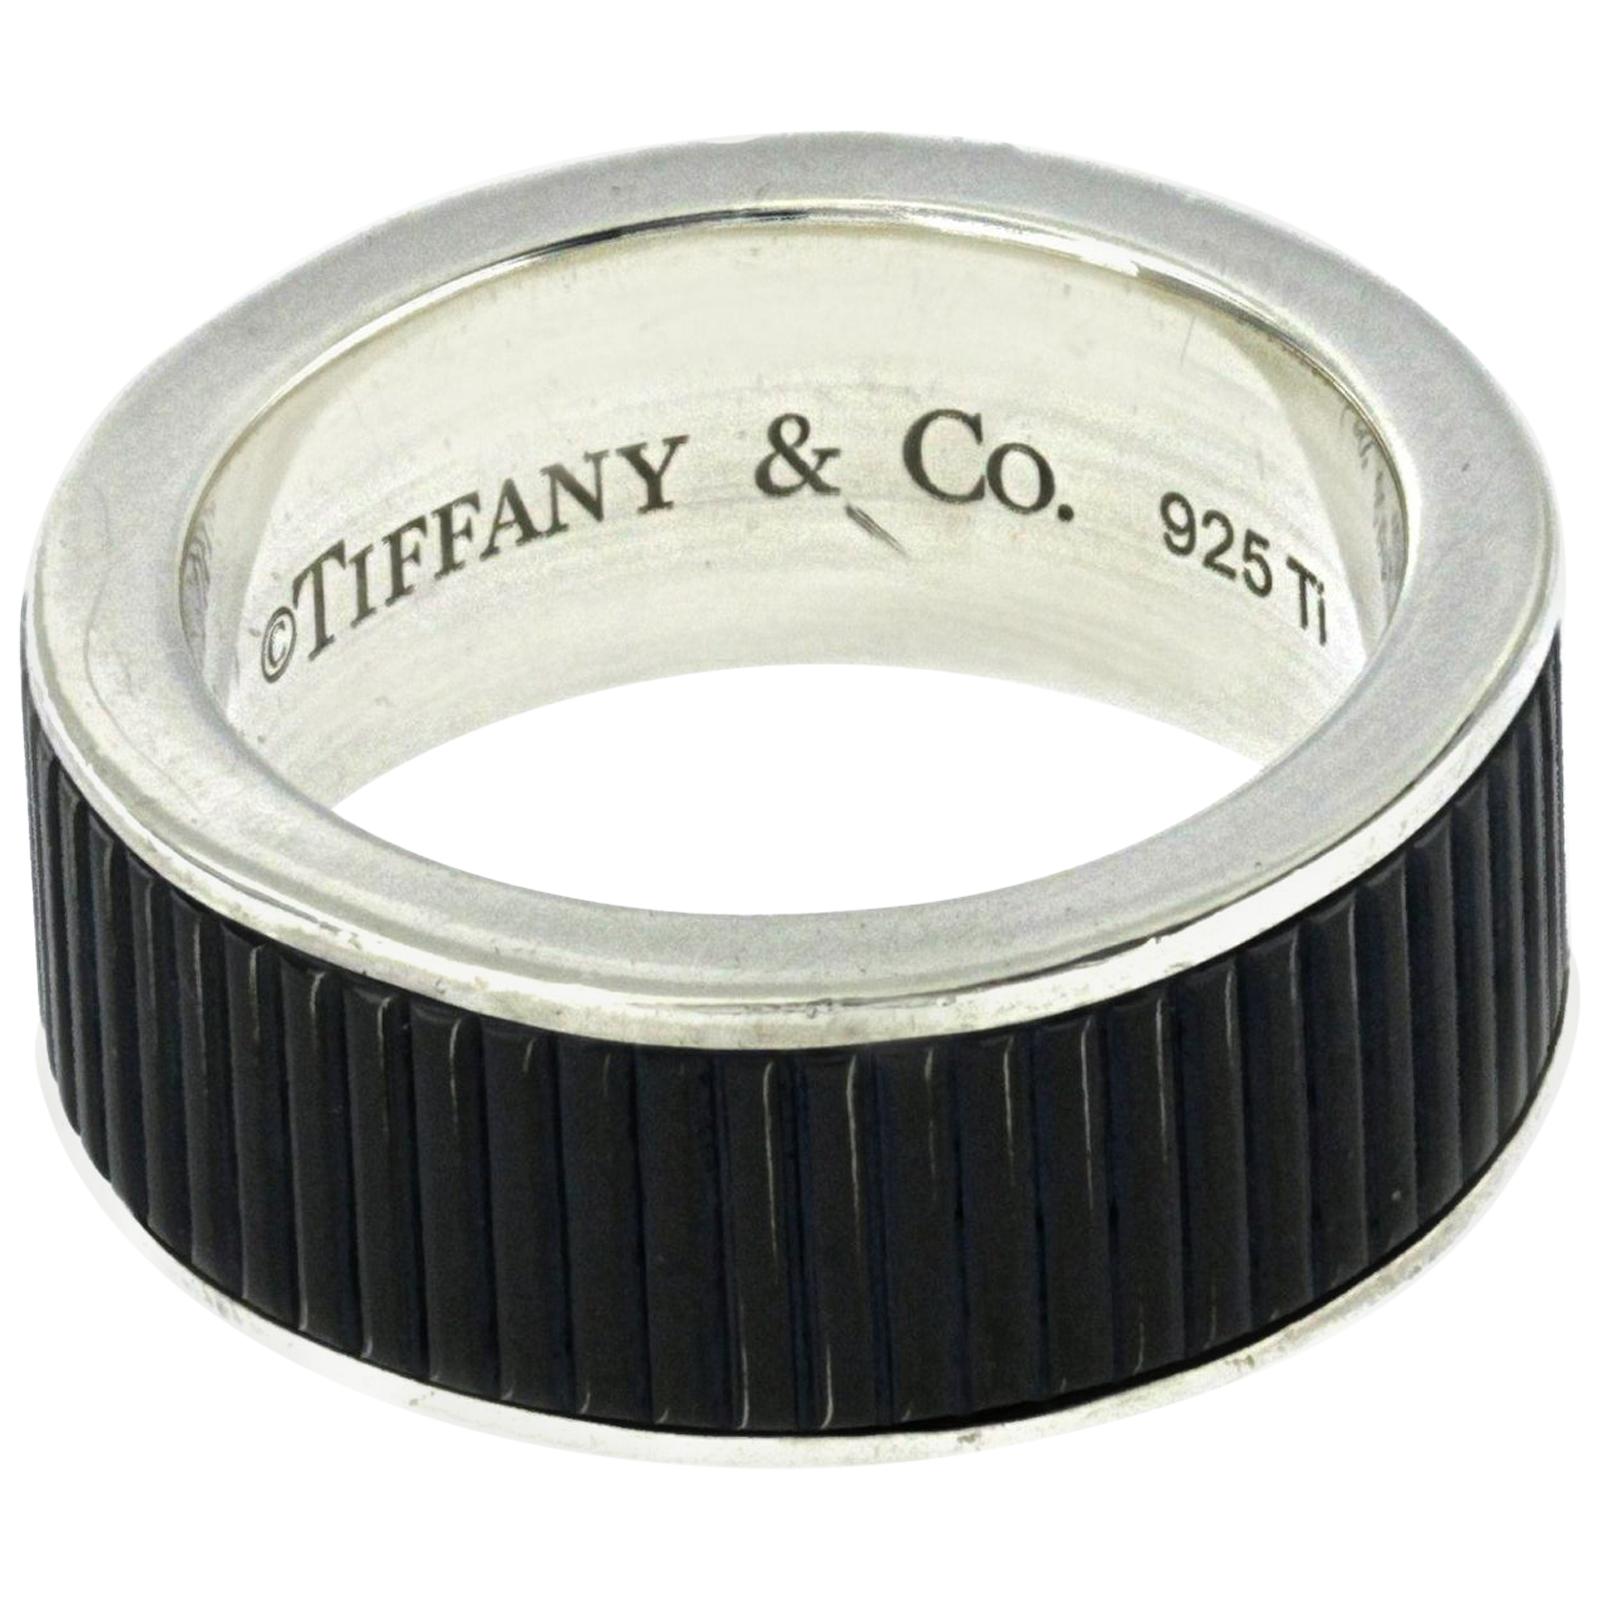 Tiffany & Co. 925 Sterling Silver Titanium Coin Edge Band Ring